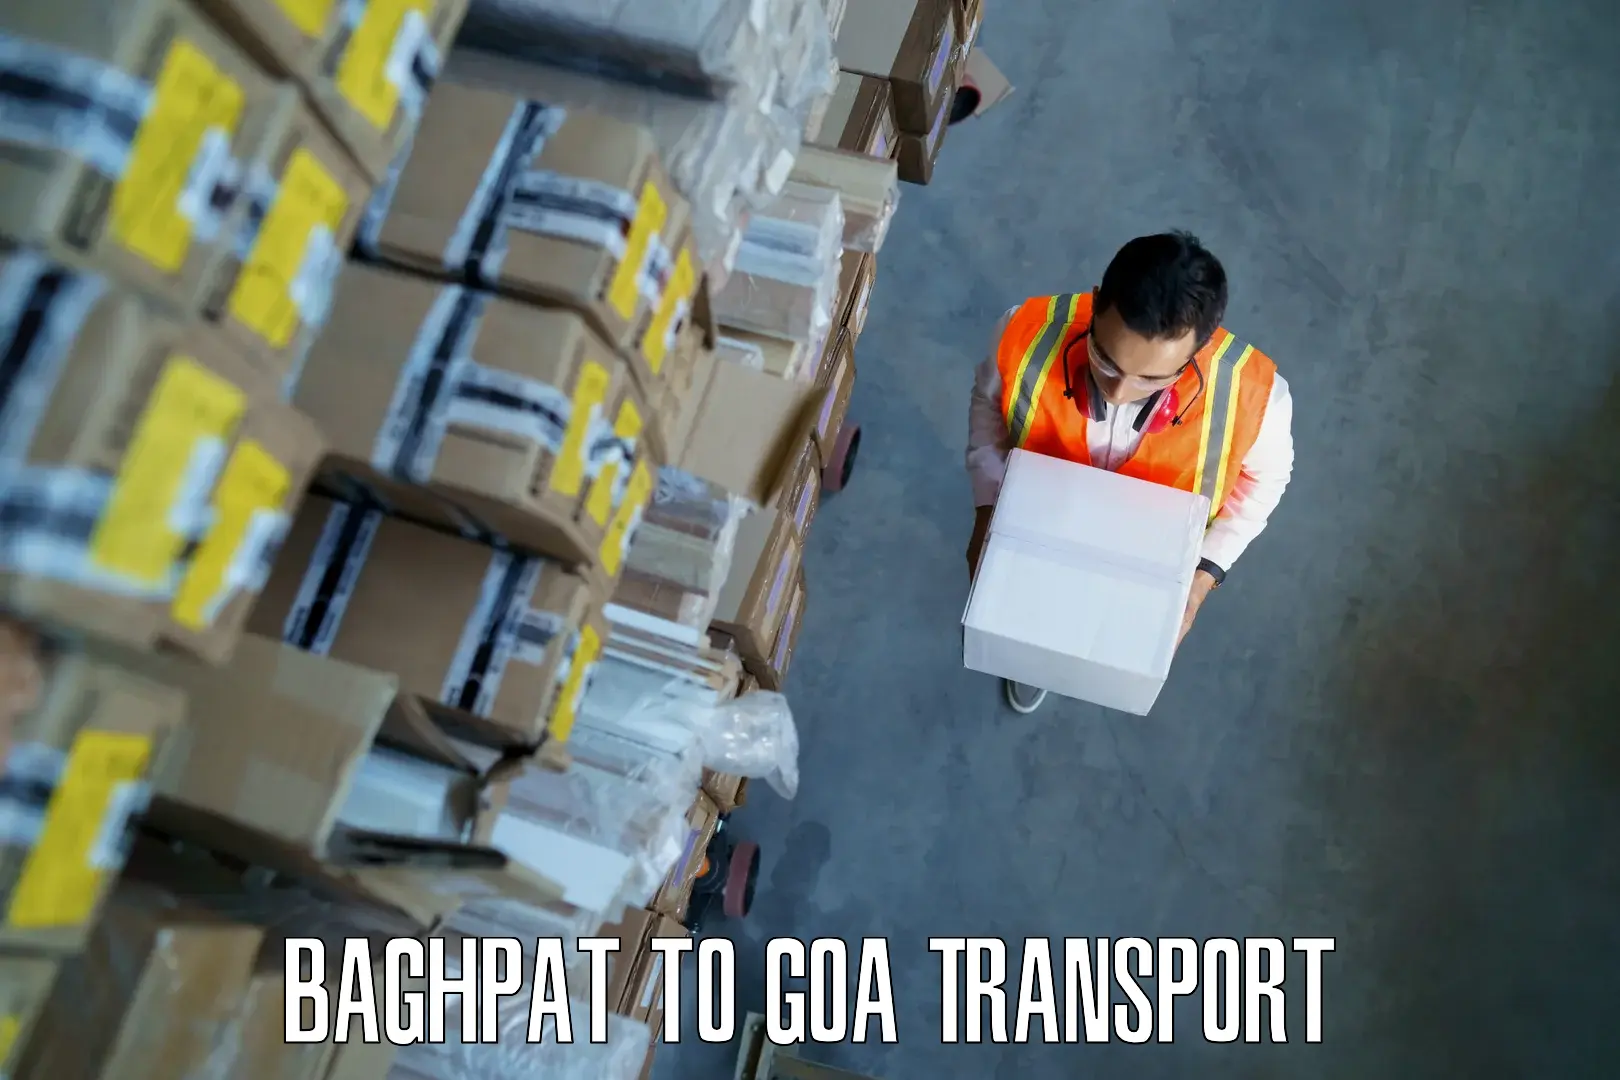 Delivery service Baghpat to Canacona